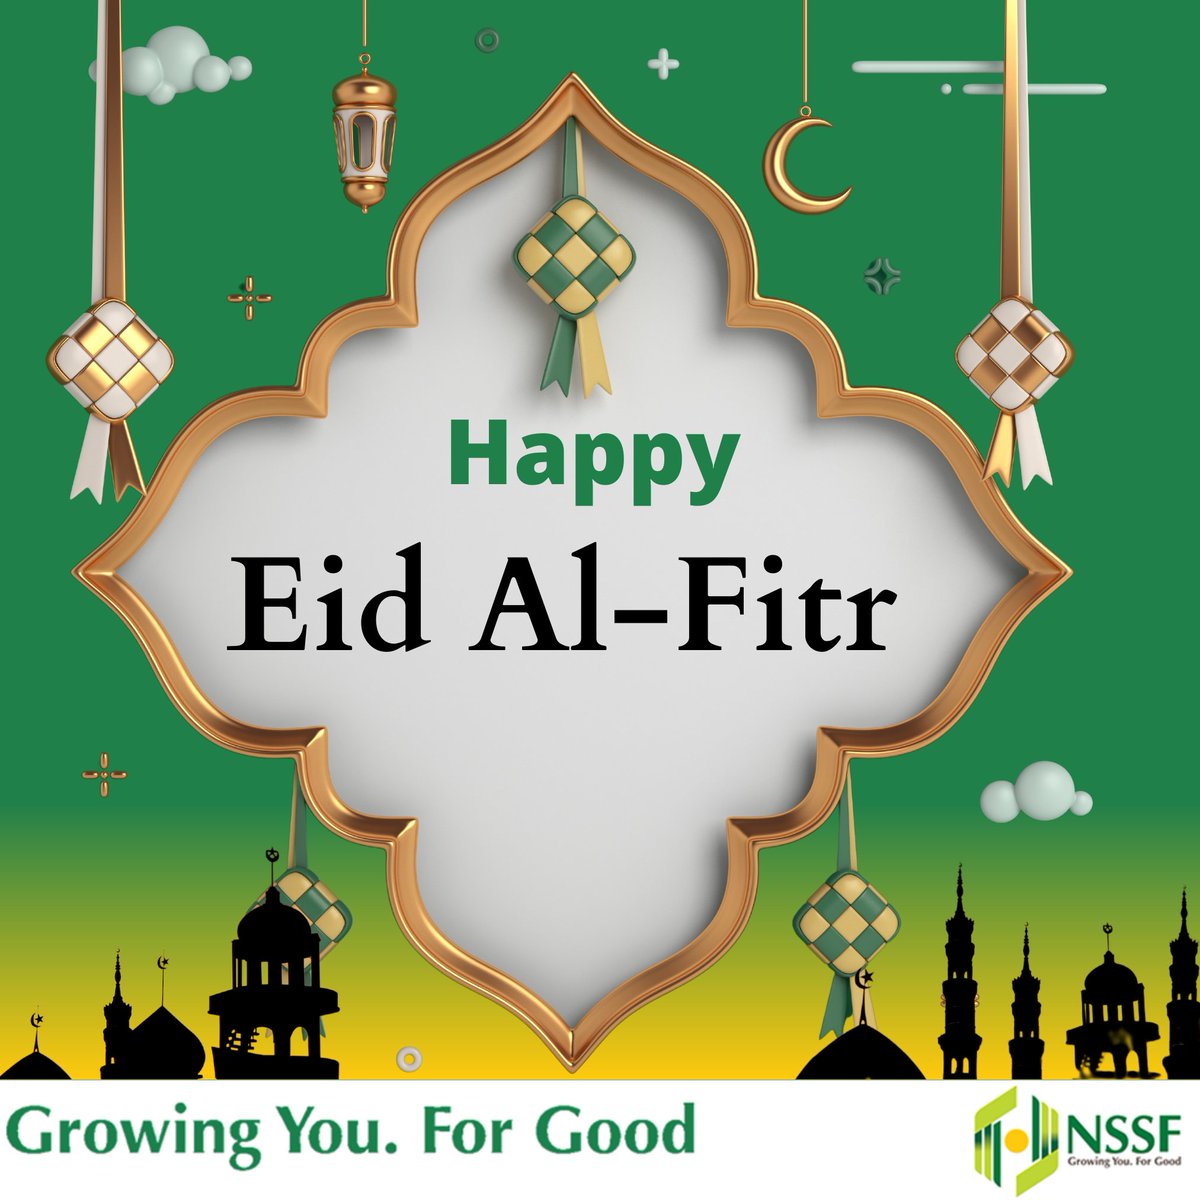 To our Muslim brothers and sisters, on this joyous occasion of Eid, may Allah's blessings fill your life with happiness and open all the doors of success now and always. #LeavingNoOneBehind